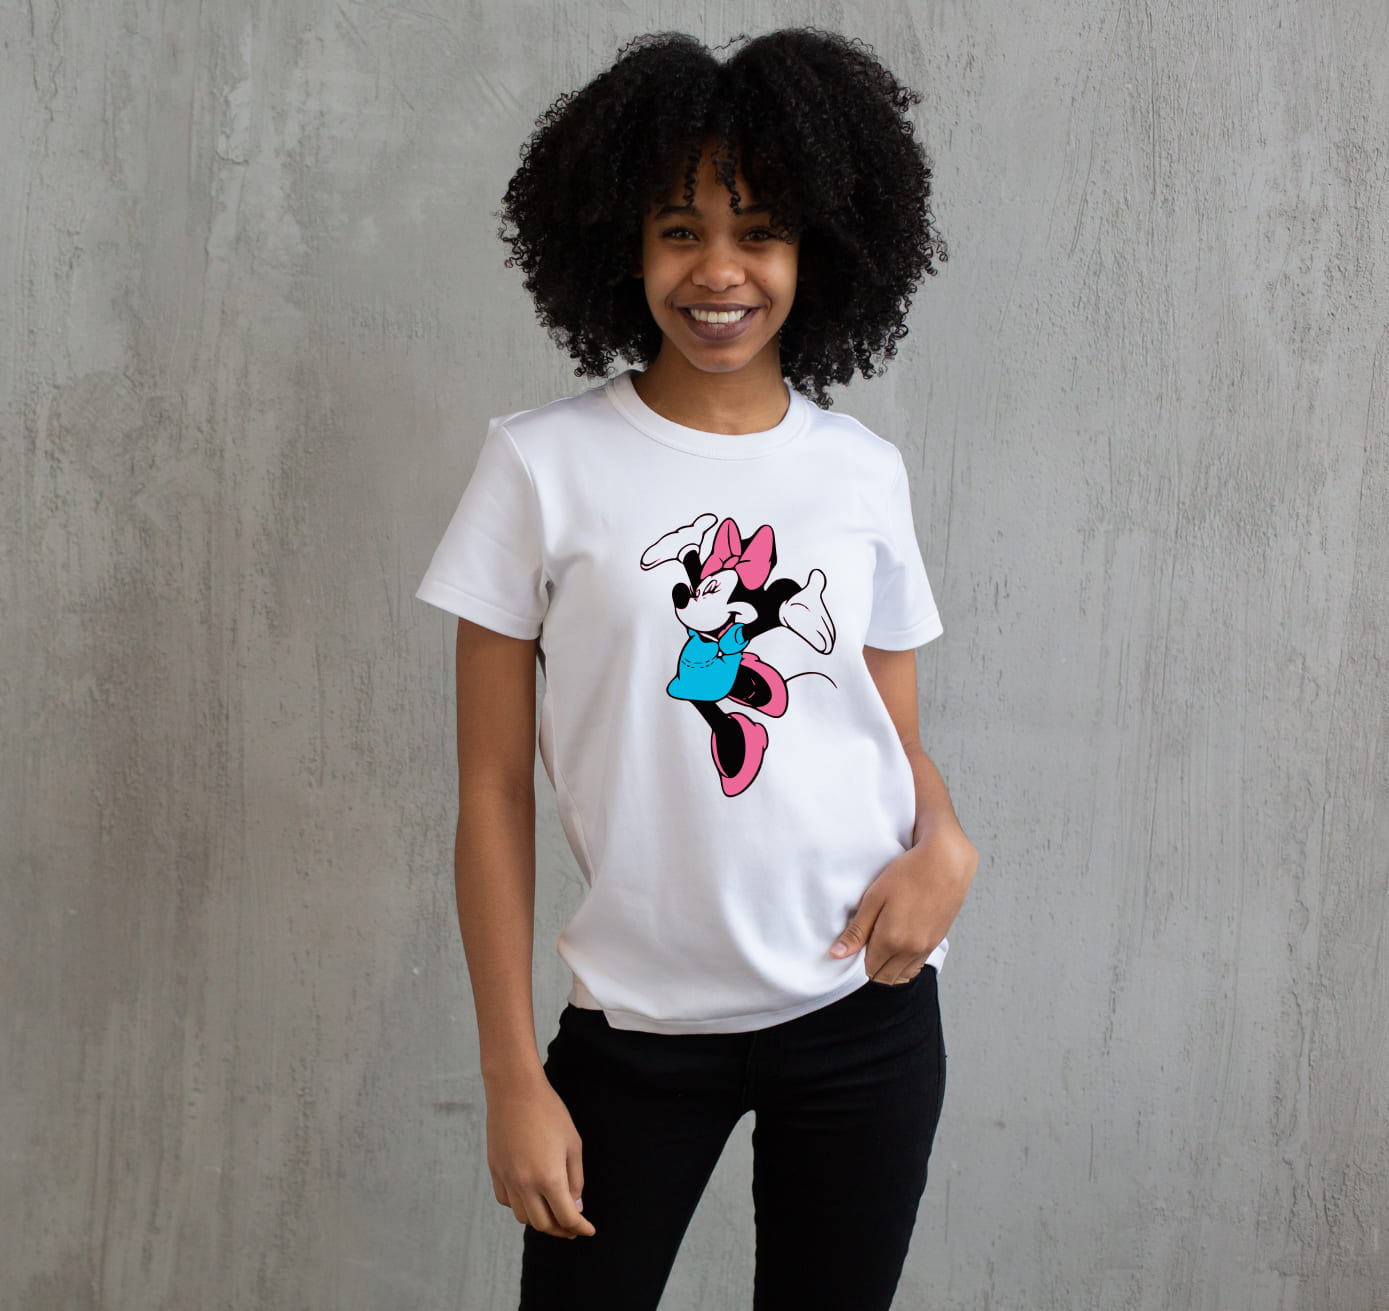 Active mickey mouse is a perfect choice for your t-shirt.